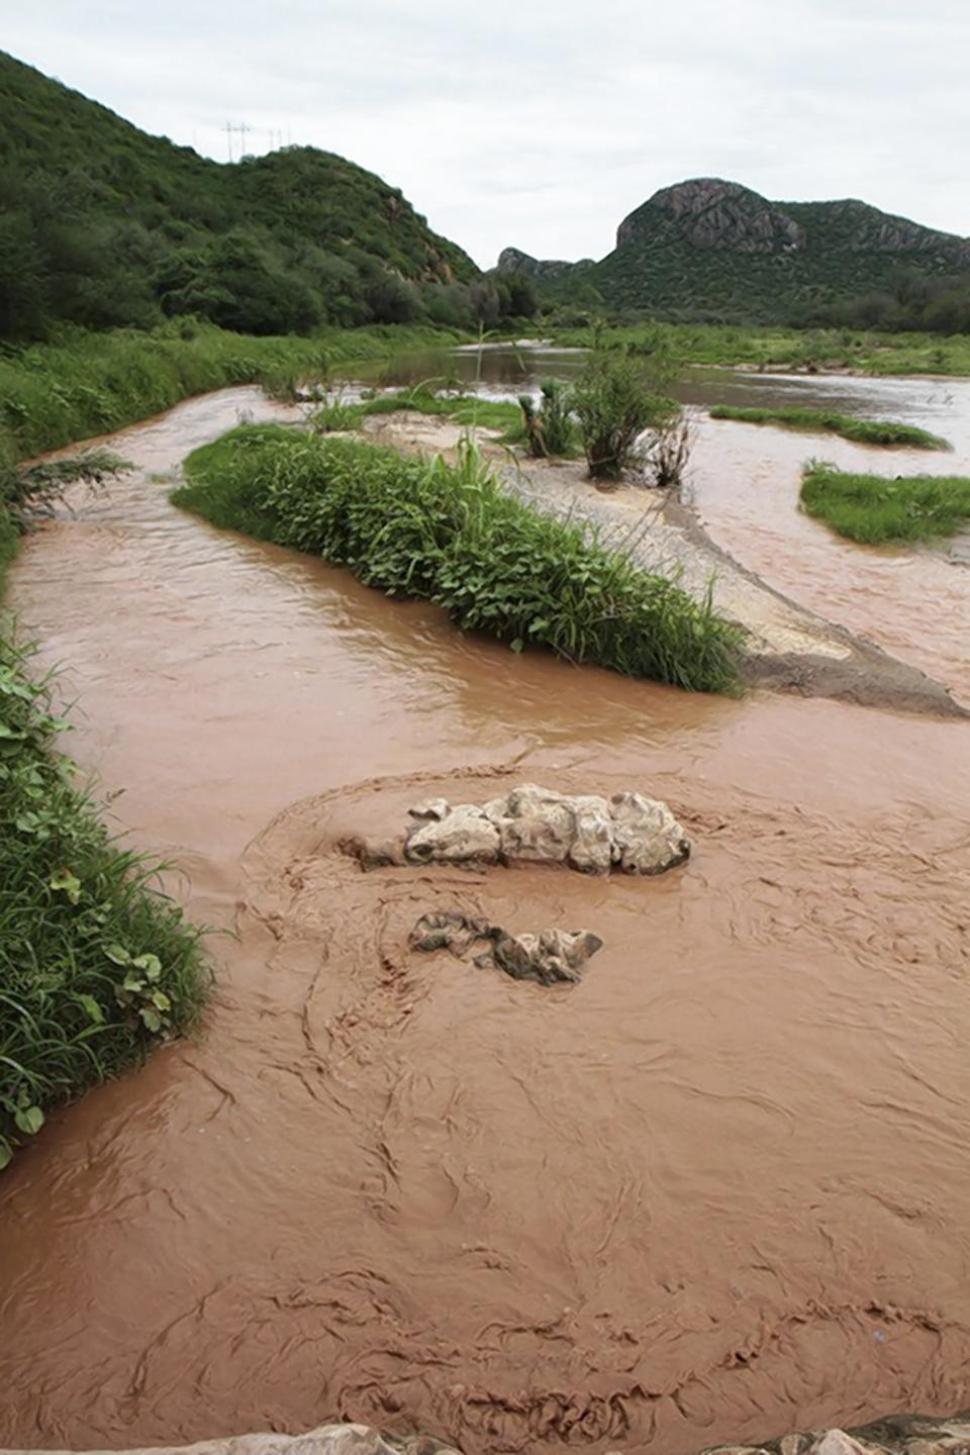 Now, officials are working to de-acidify the rivers.